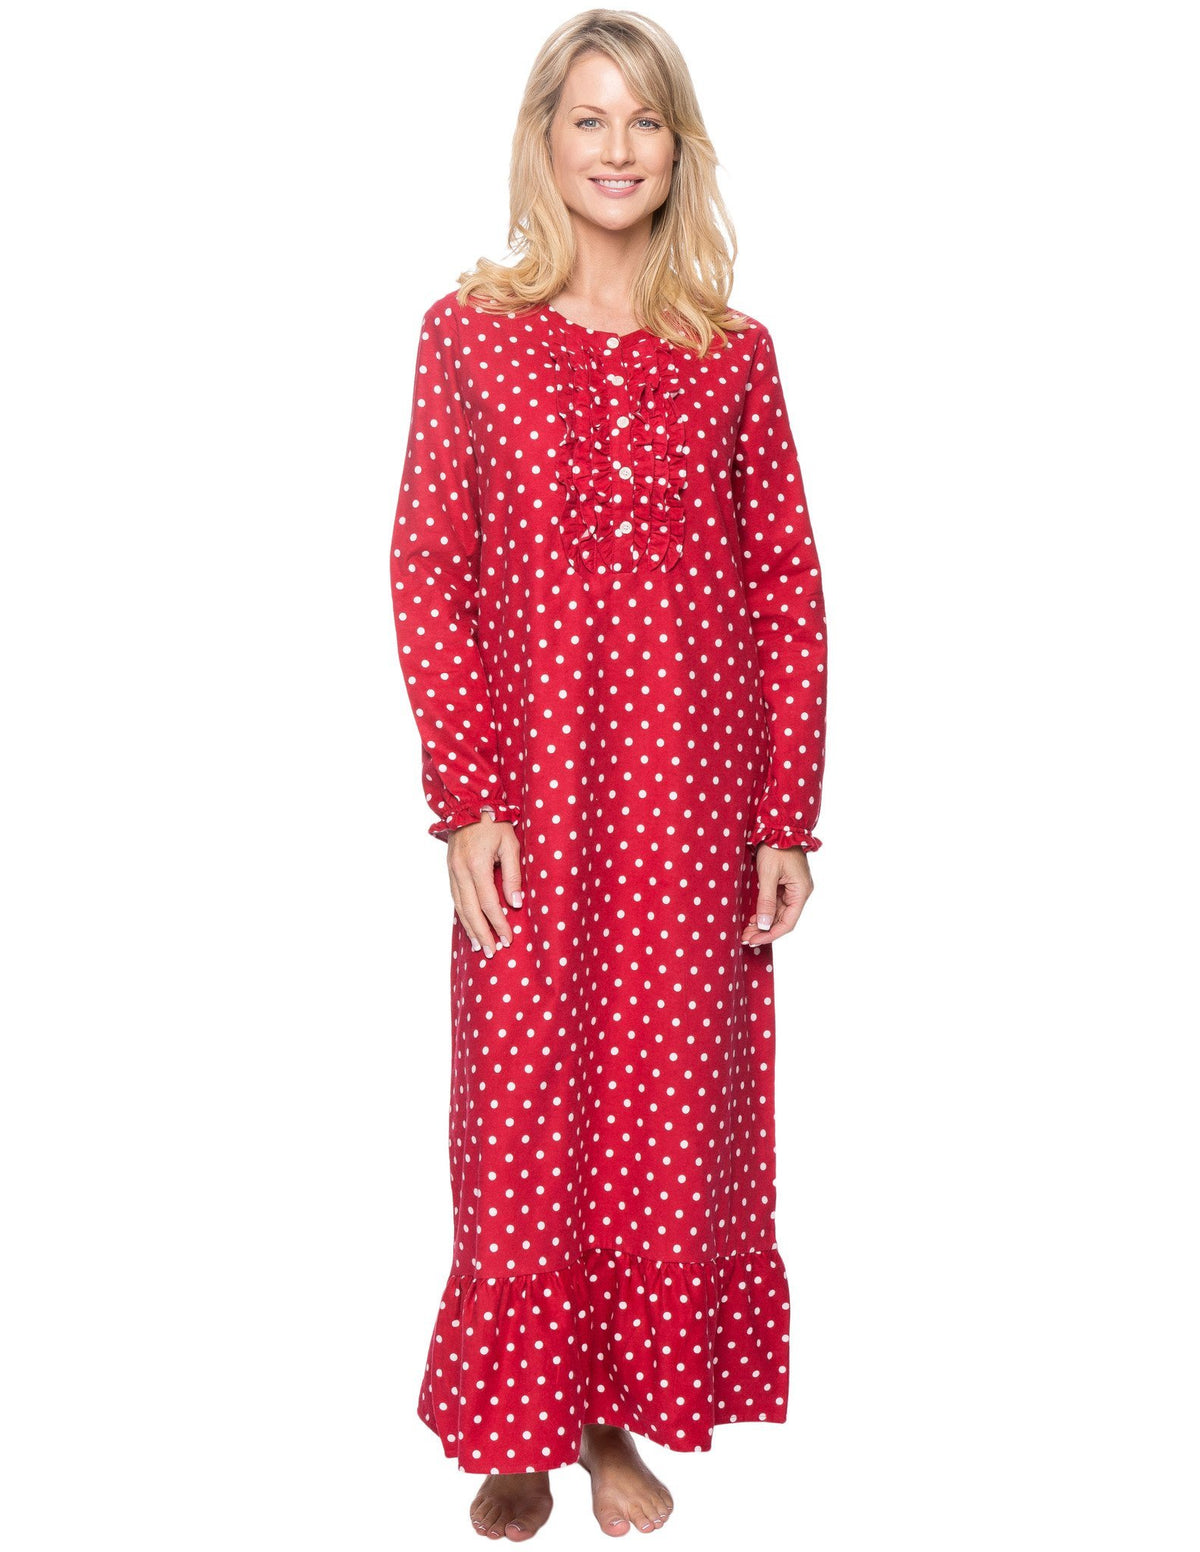 Women's Premium Flannel Long Gown - Dots Diva Red